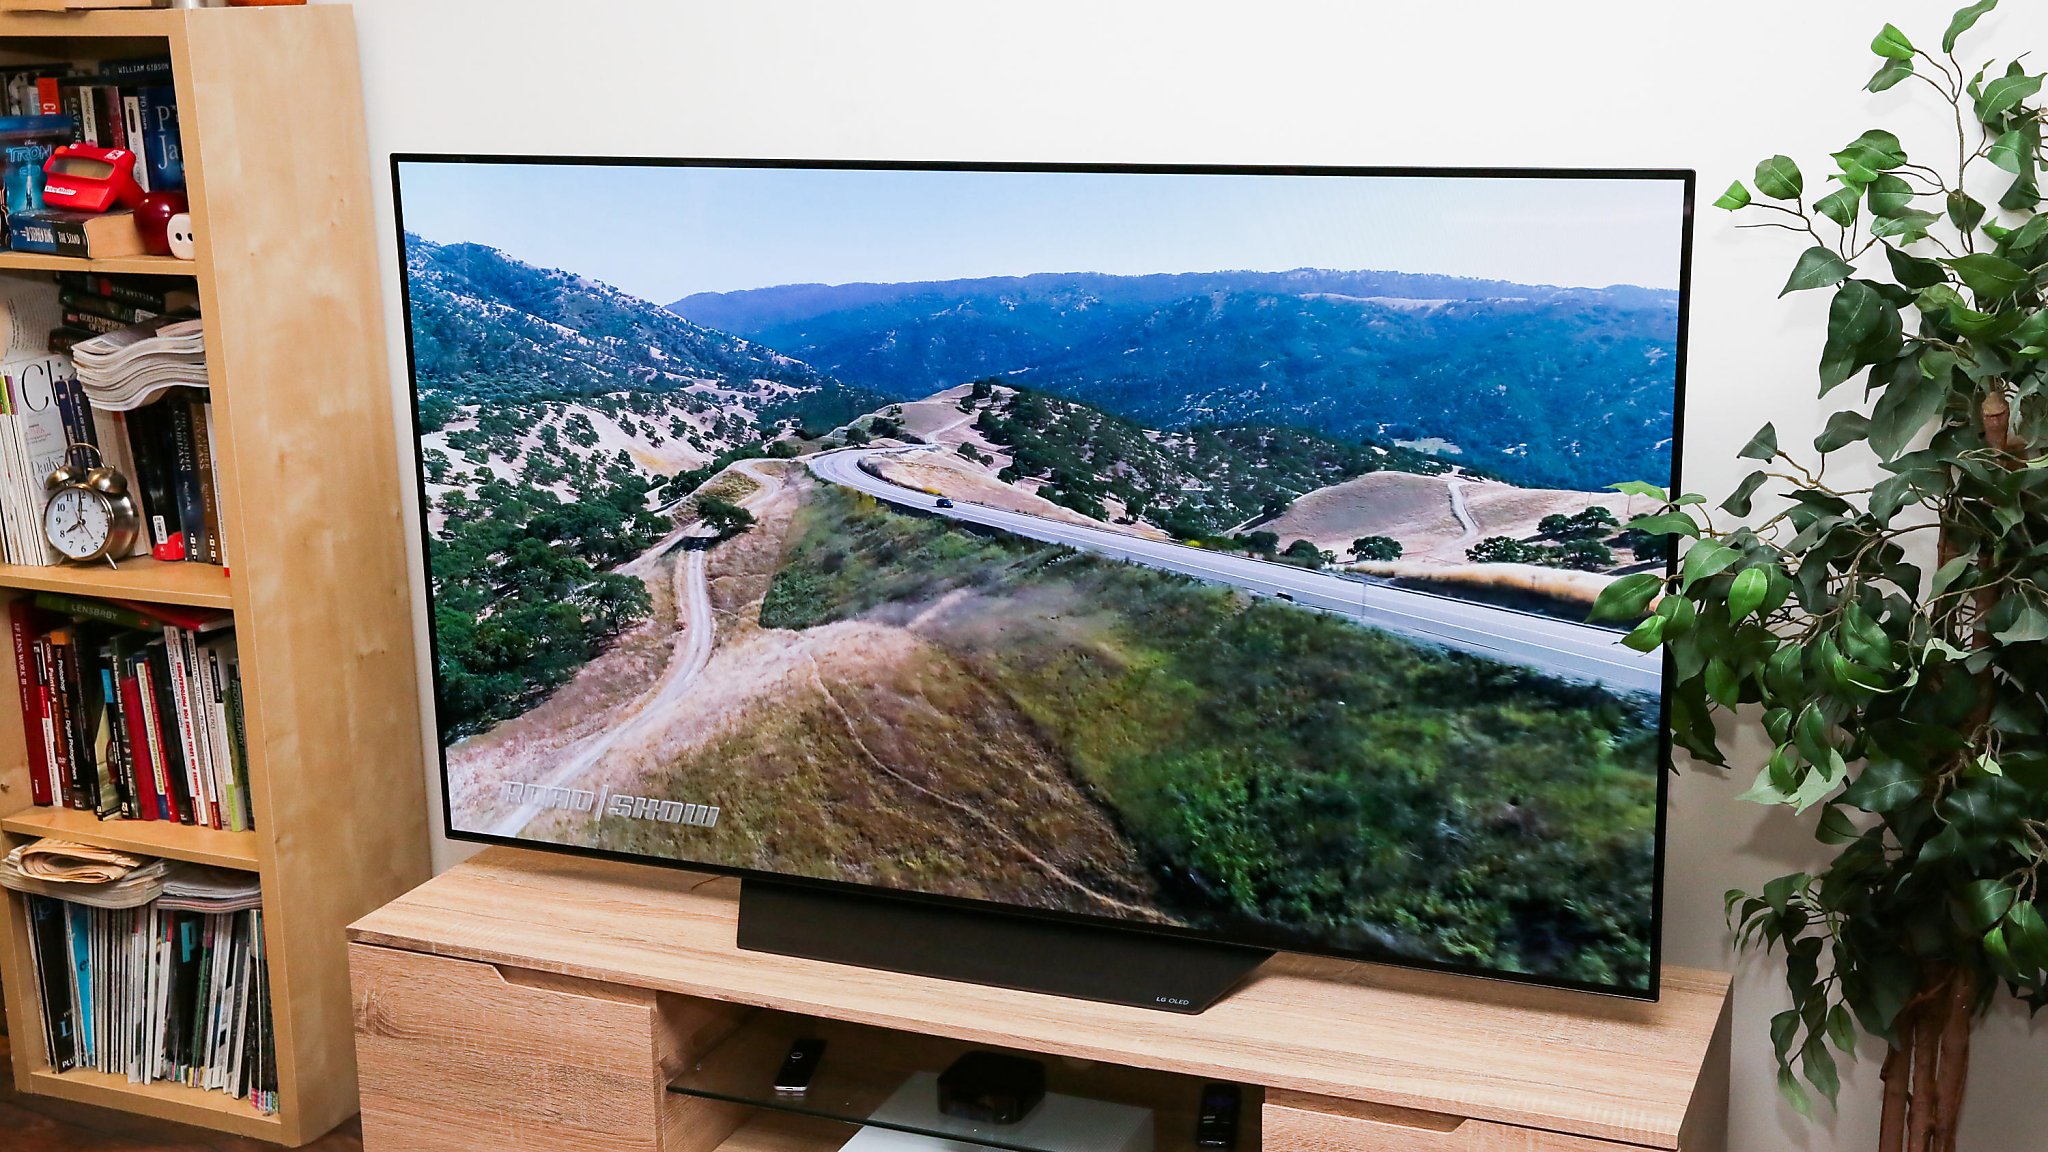 Cnet Review These 65 Inch Tvs Are The Best